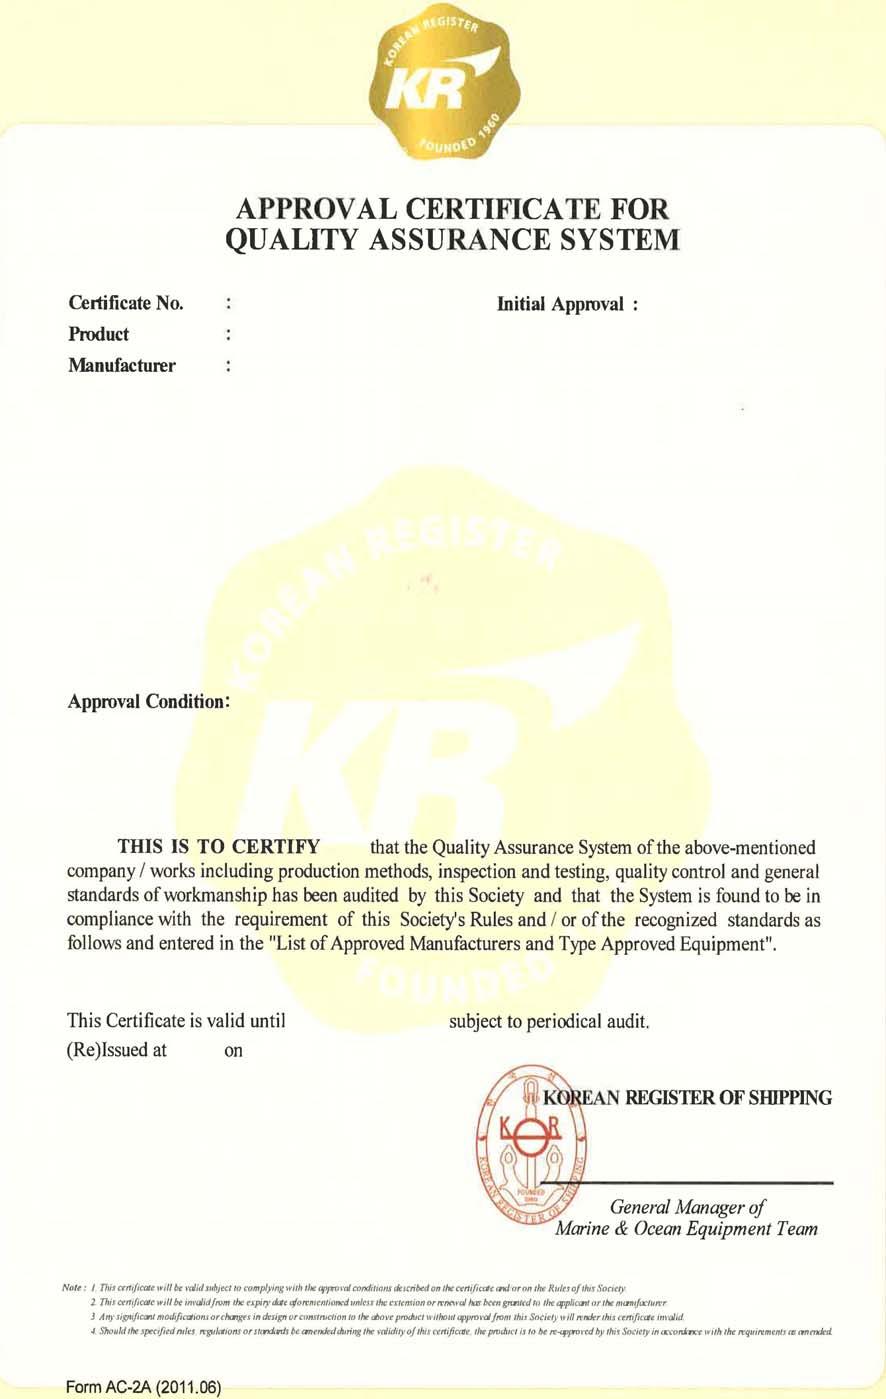 Annex 4 Approval Certificate for Quality Assurance System Annex 4 <4.